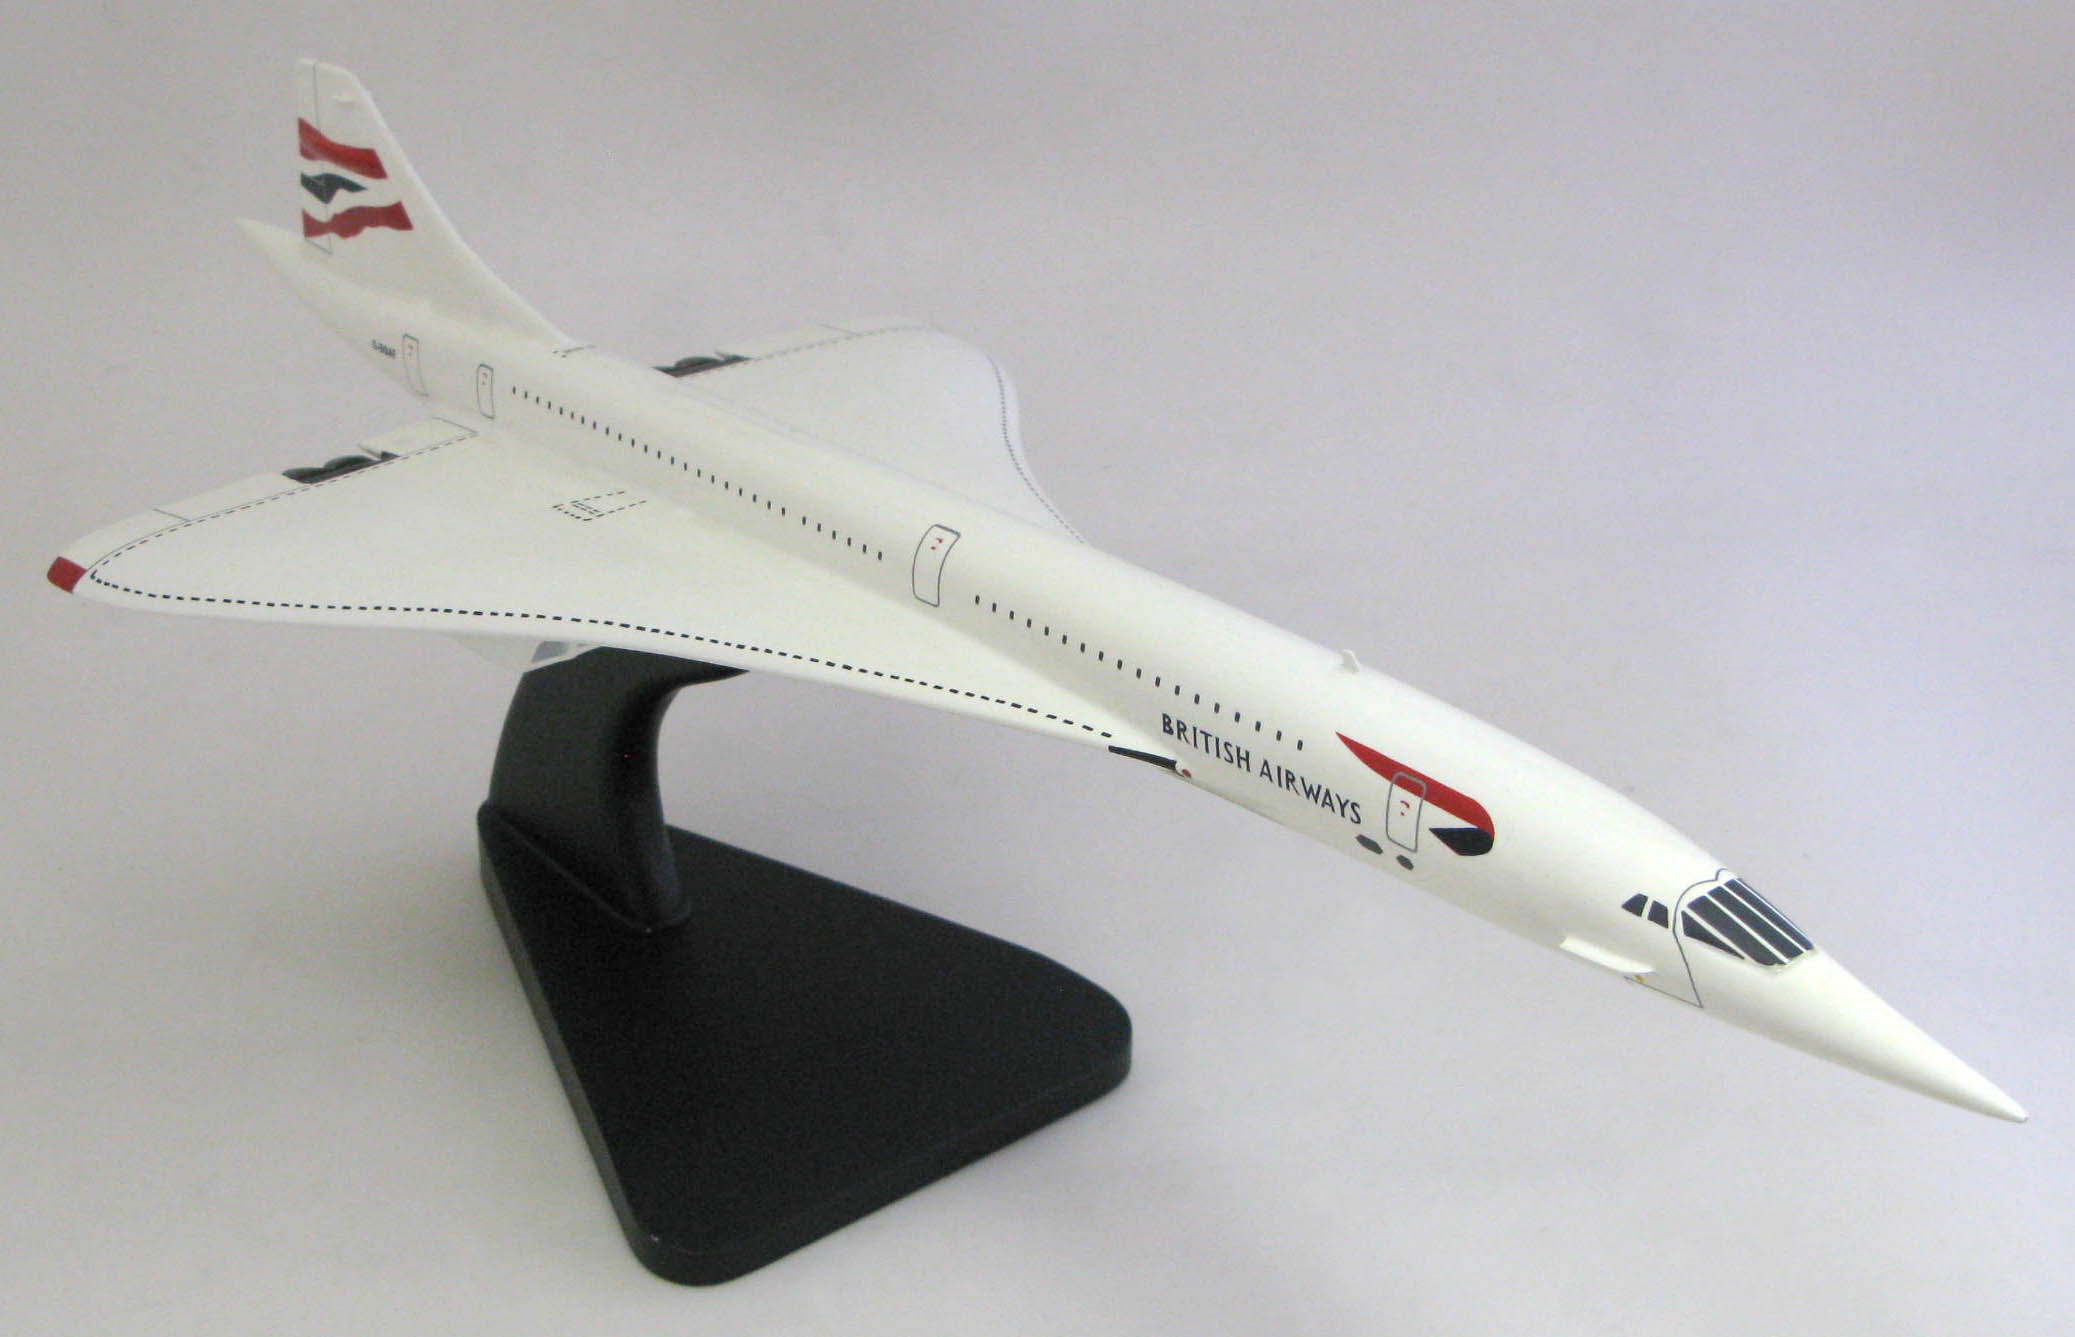 Concorde Model in British Airways livery :: Rochester Avionic Archives